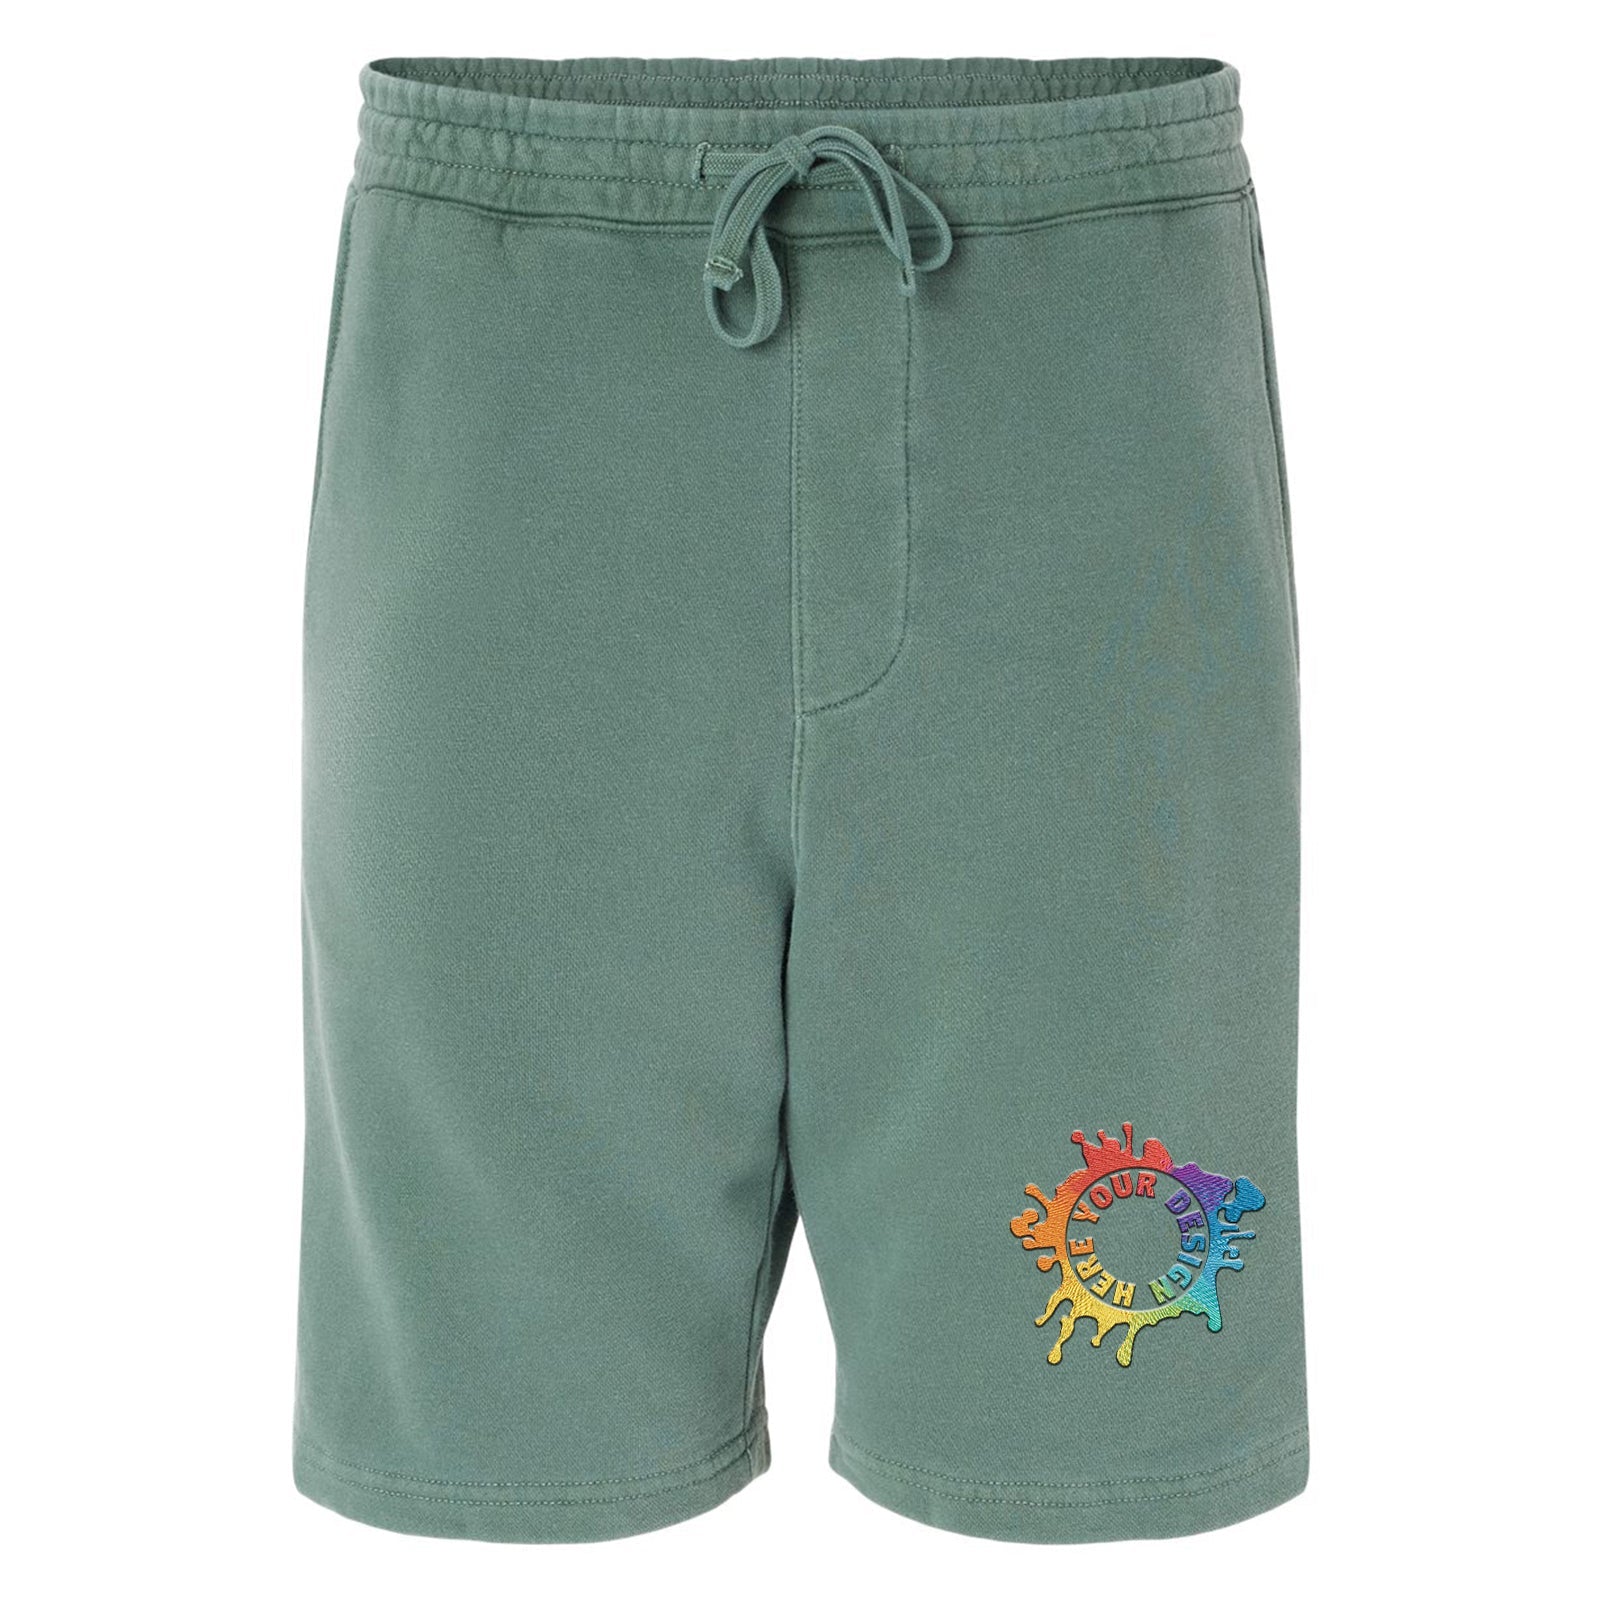 Independent Trading Co. Pigment-Dyed Fleece Shorts Embroidery - Mato & Hash